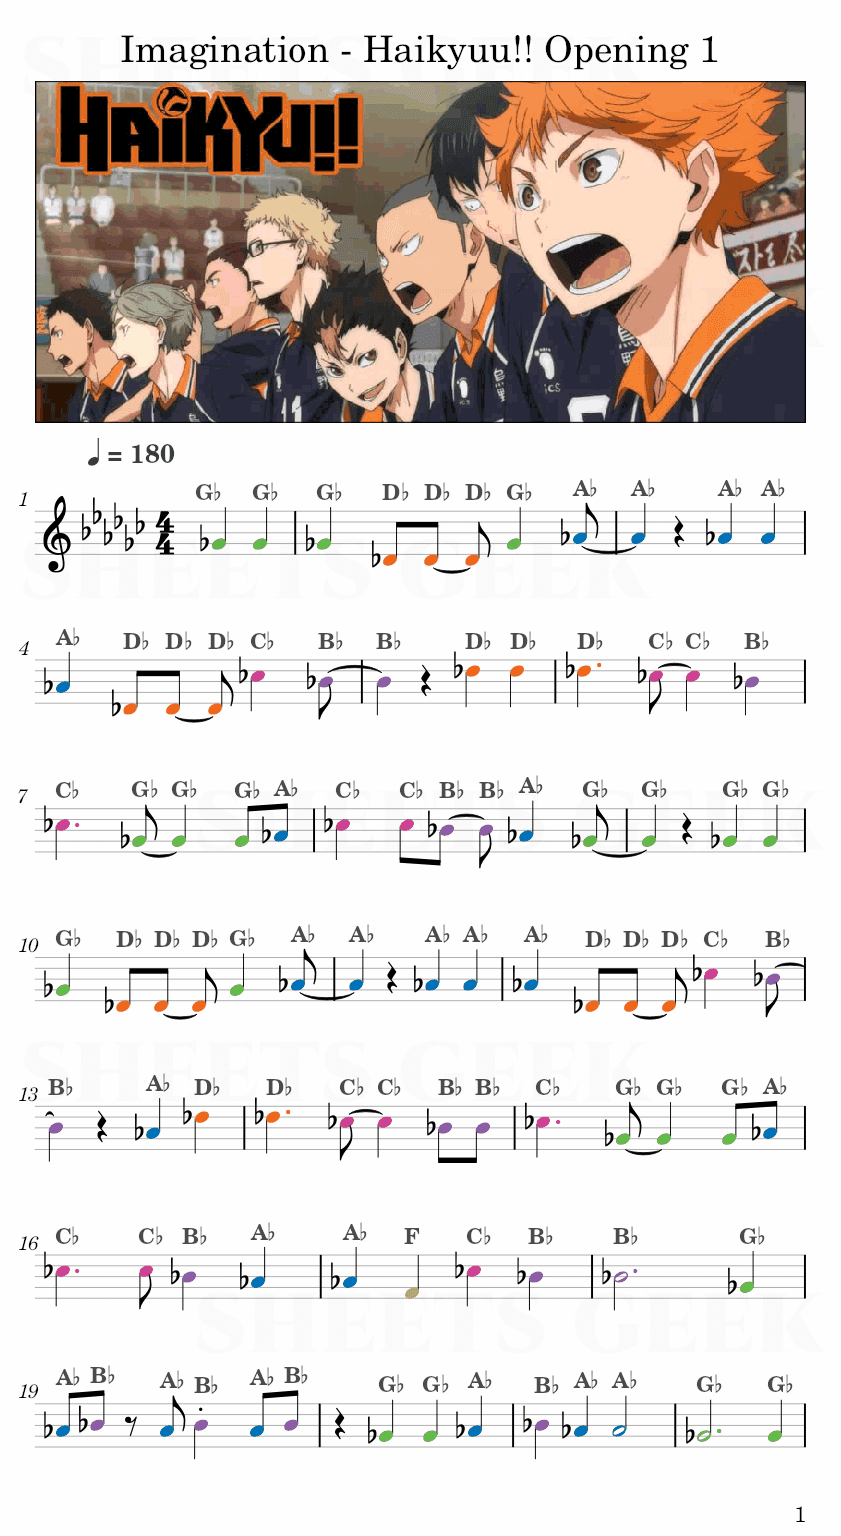 Imagination - Haikyuu!! Opening 1 Easy Sheet Music Free for piano, keyboard, flute, violin, sax, cello page 1